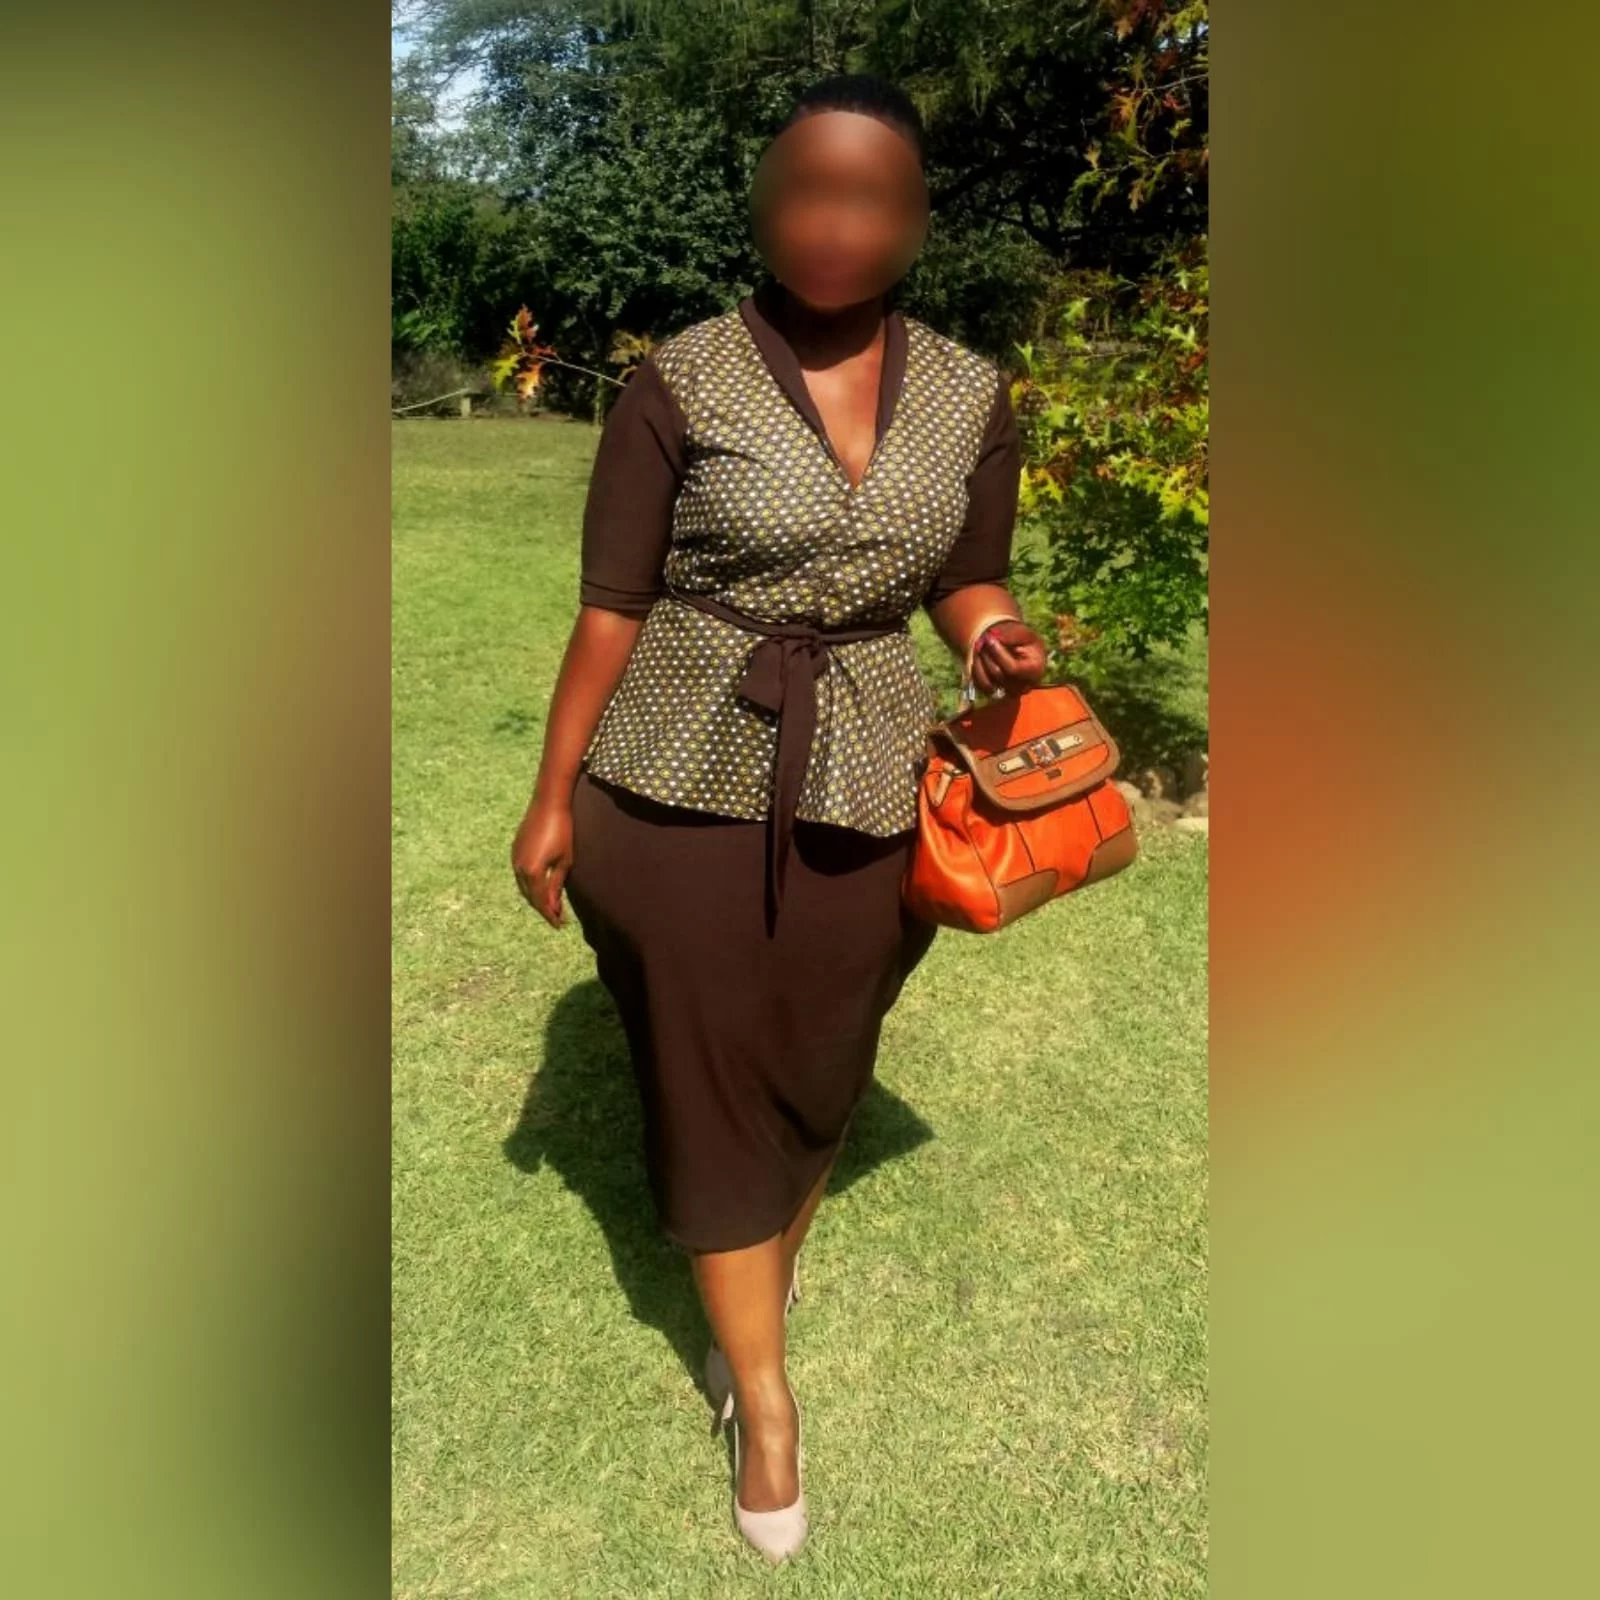 Xhosa traditional wear blouse and matching brown pencil skirt 1 a pencil skirt below the knee with a back slit. With a xhosa traditional blouse. Blouse with sleeves, collar and belt in brown matching the skirt.